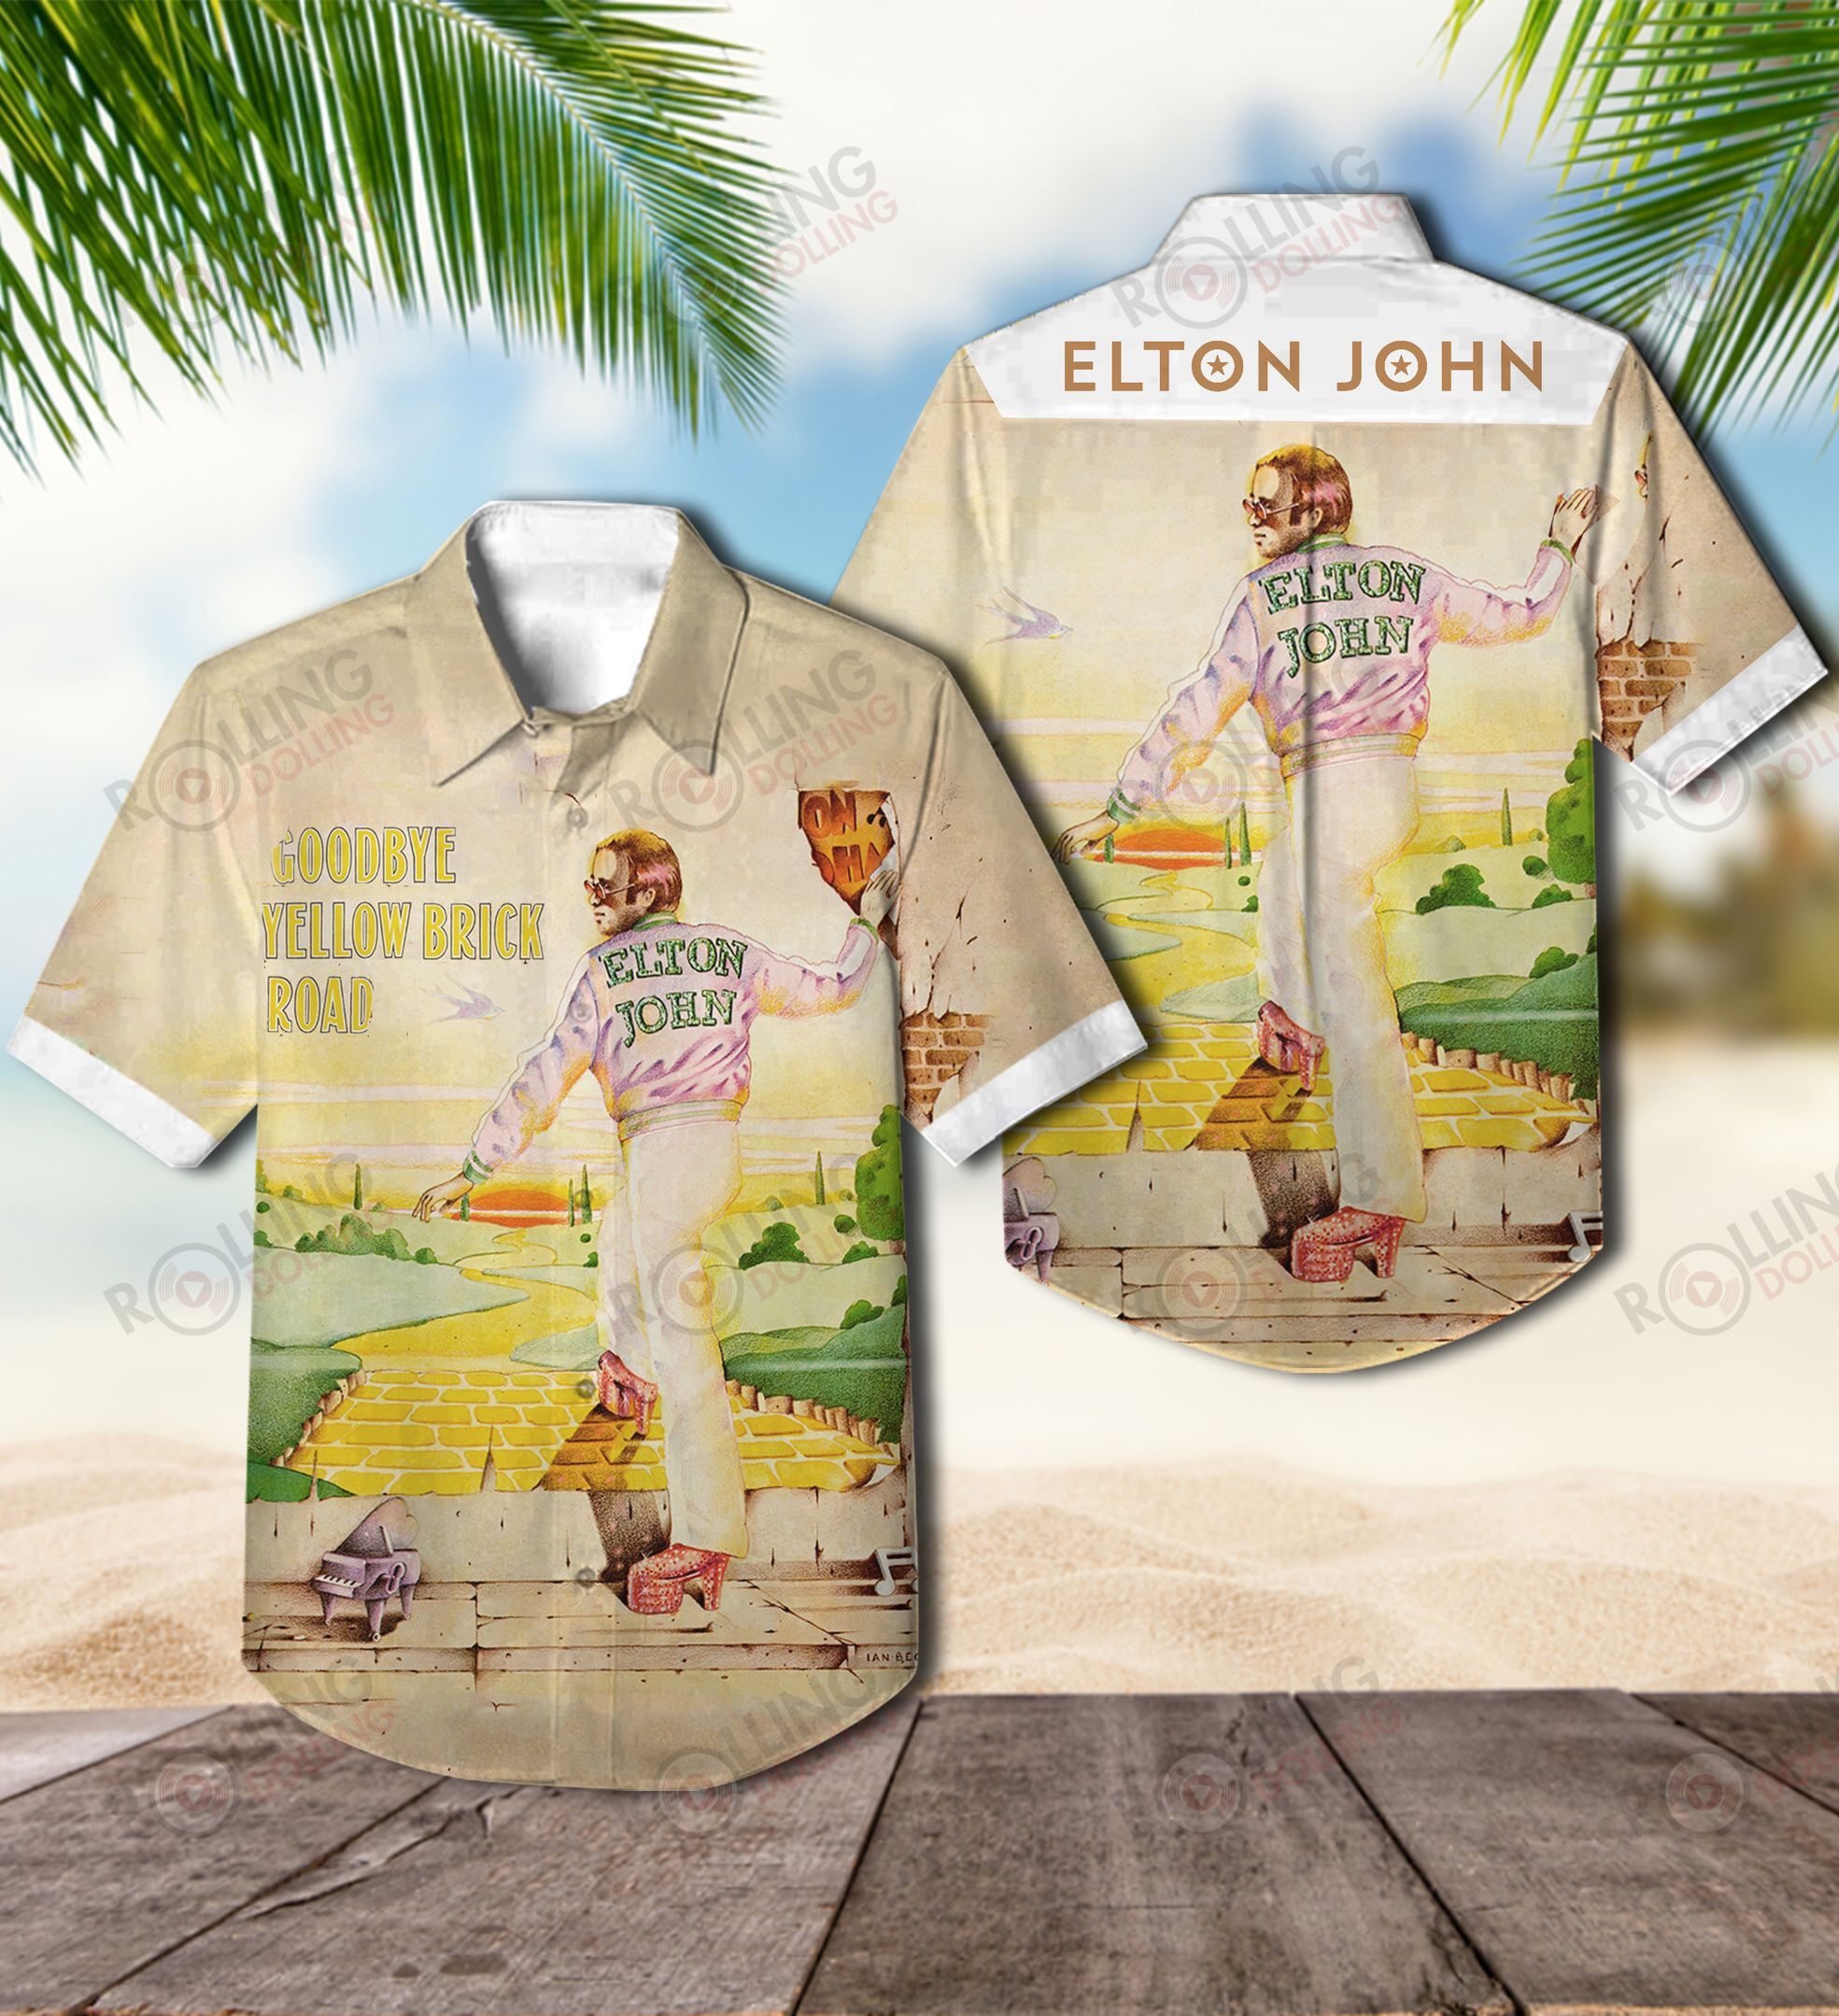 For summer, consider wearing This Amazing Hawaiian Shirt shirt in our store 48